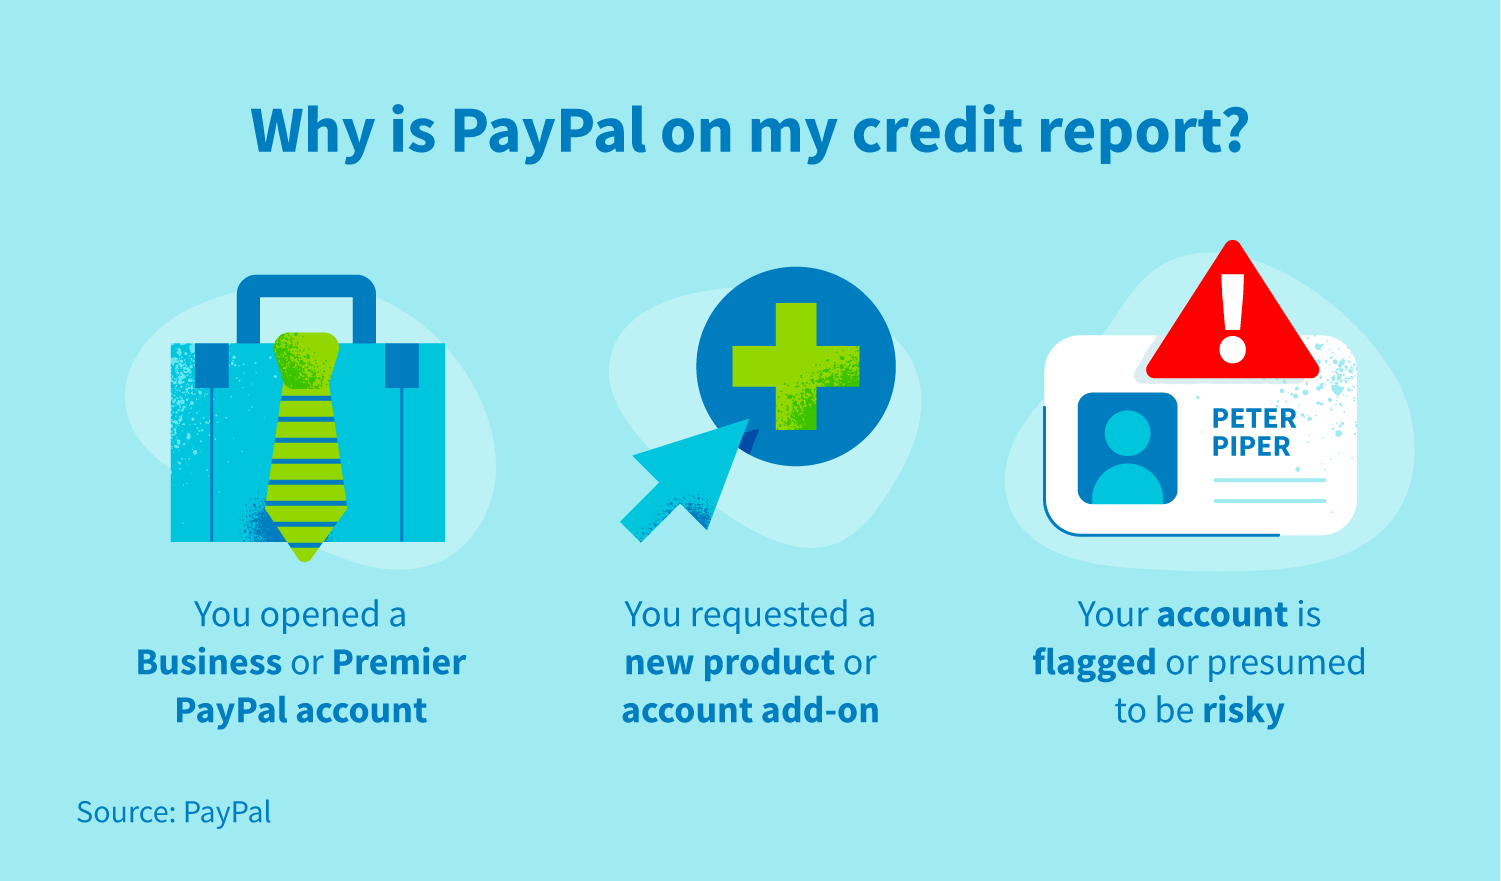 Why is PayPal on my credit report?